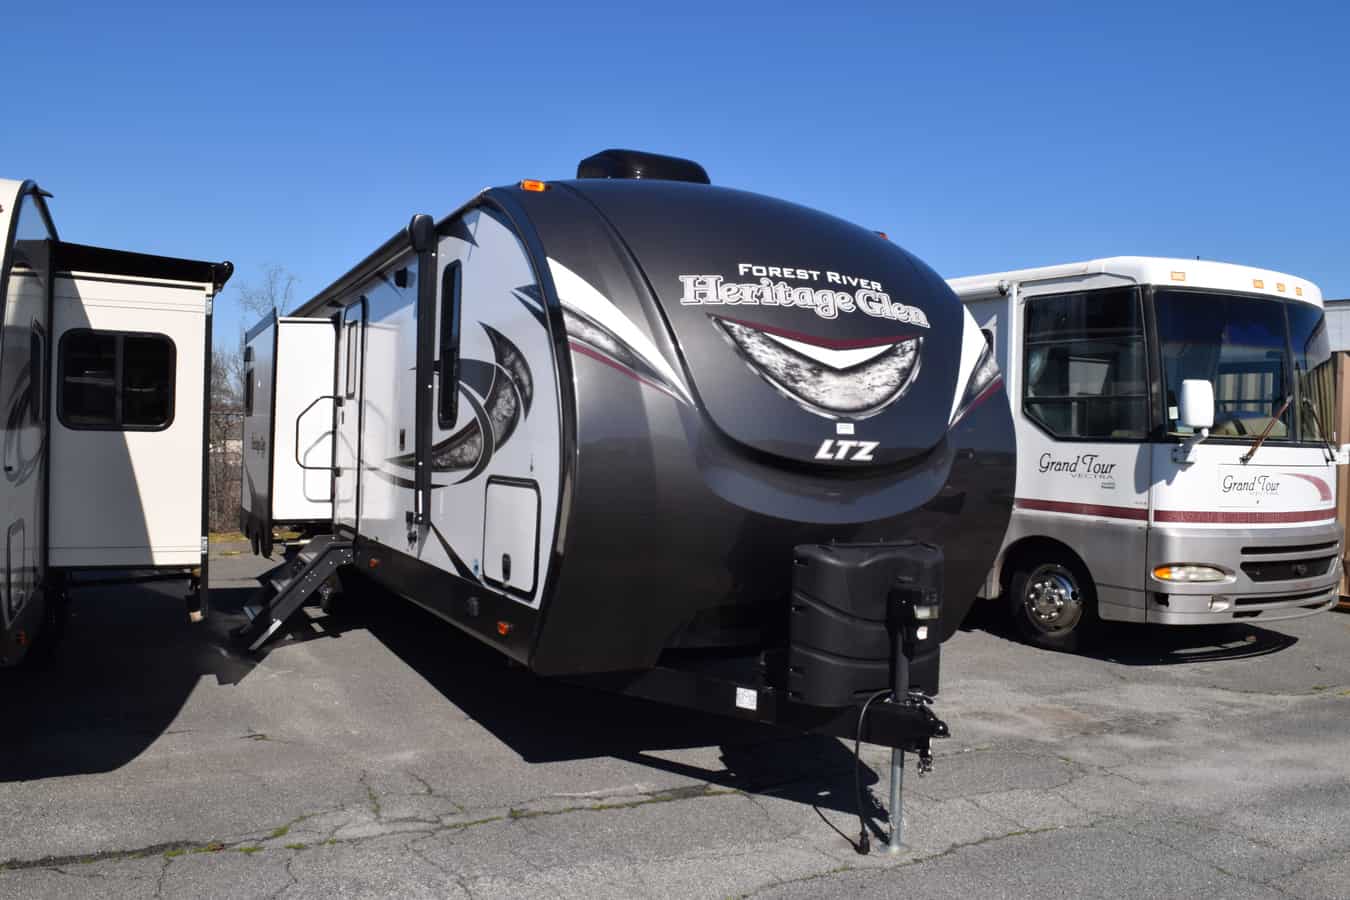 USED 2018 Forest River HERITAGE GLEN 300BH